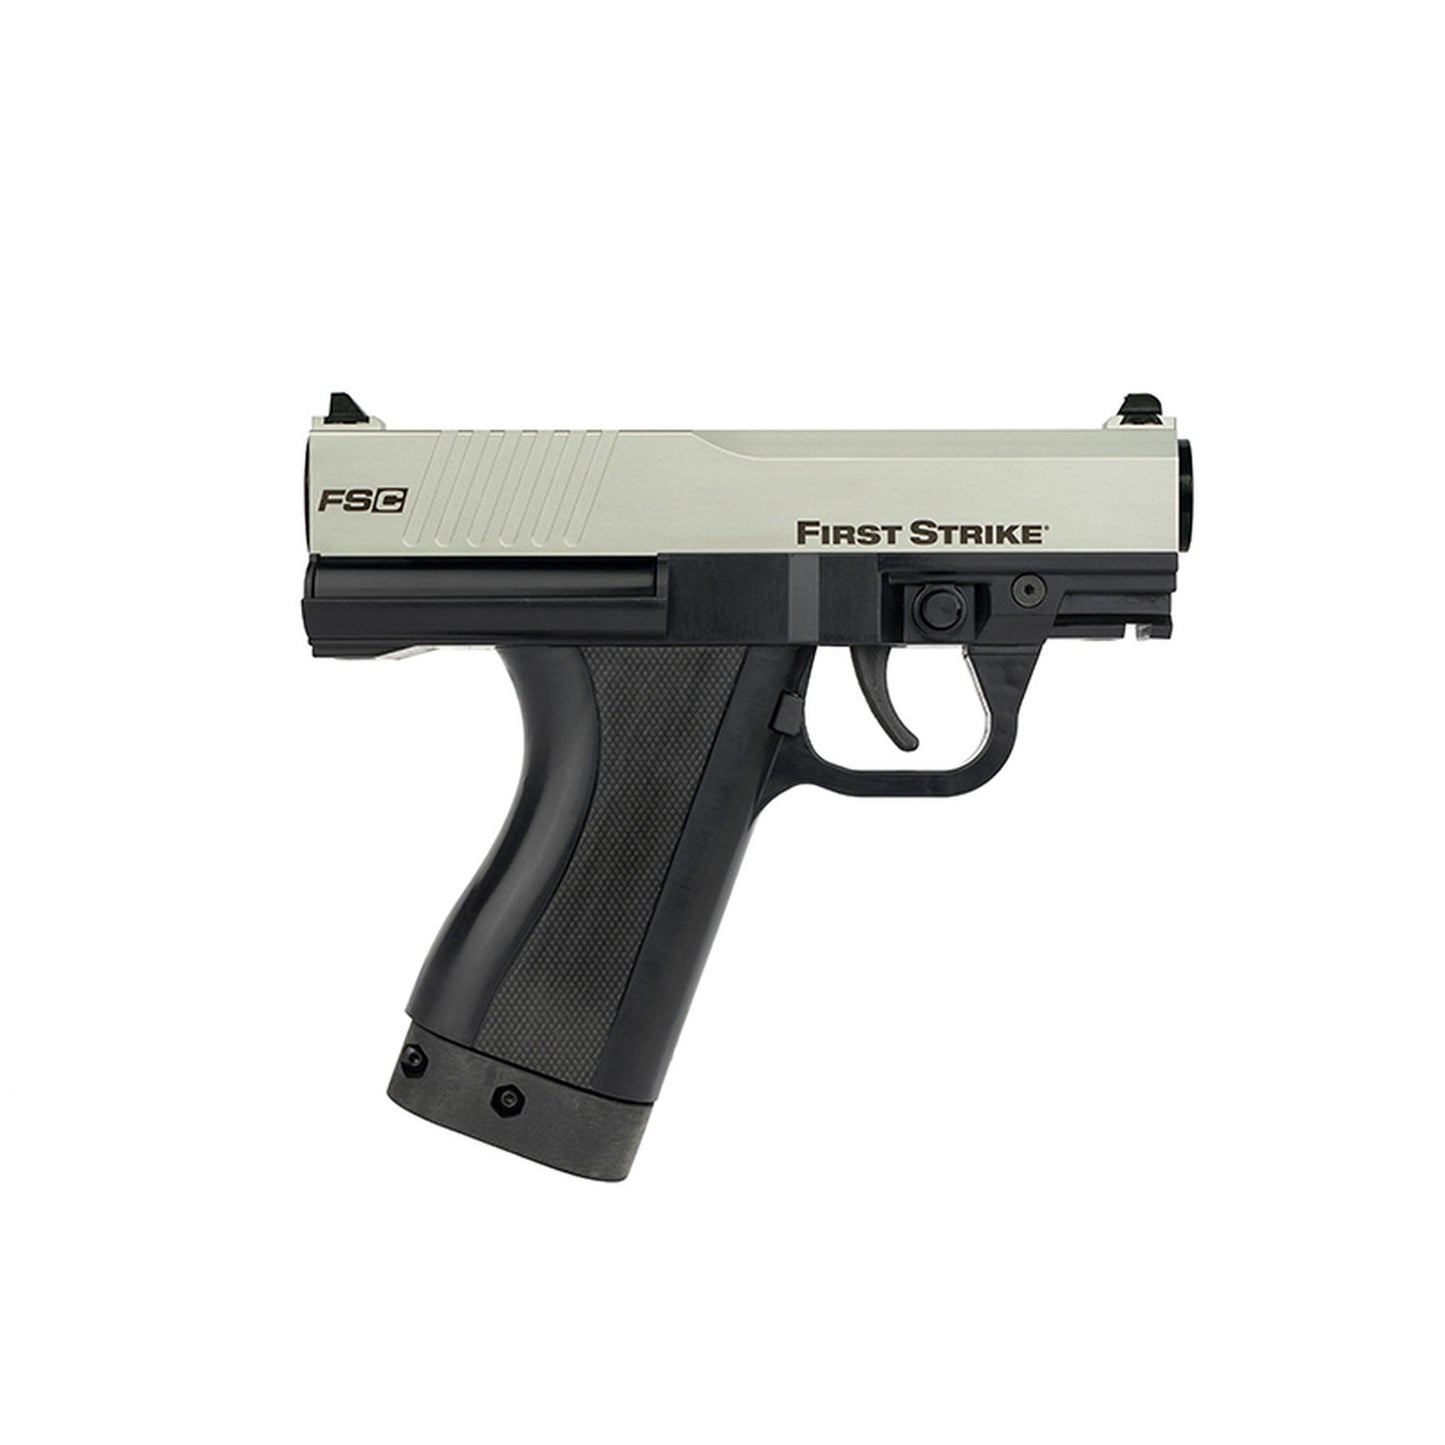 First Strike FSC (First Strike Compact) Paintball Pistol Silver/Black - 1 of 250 - First Strike